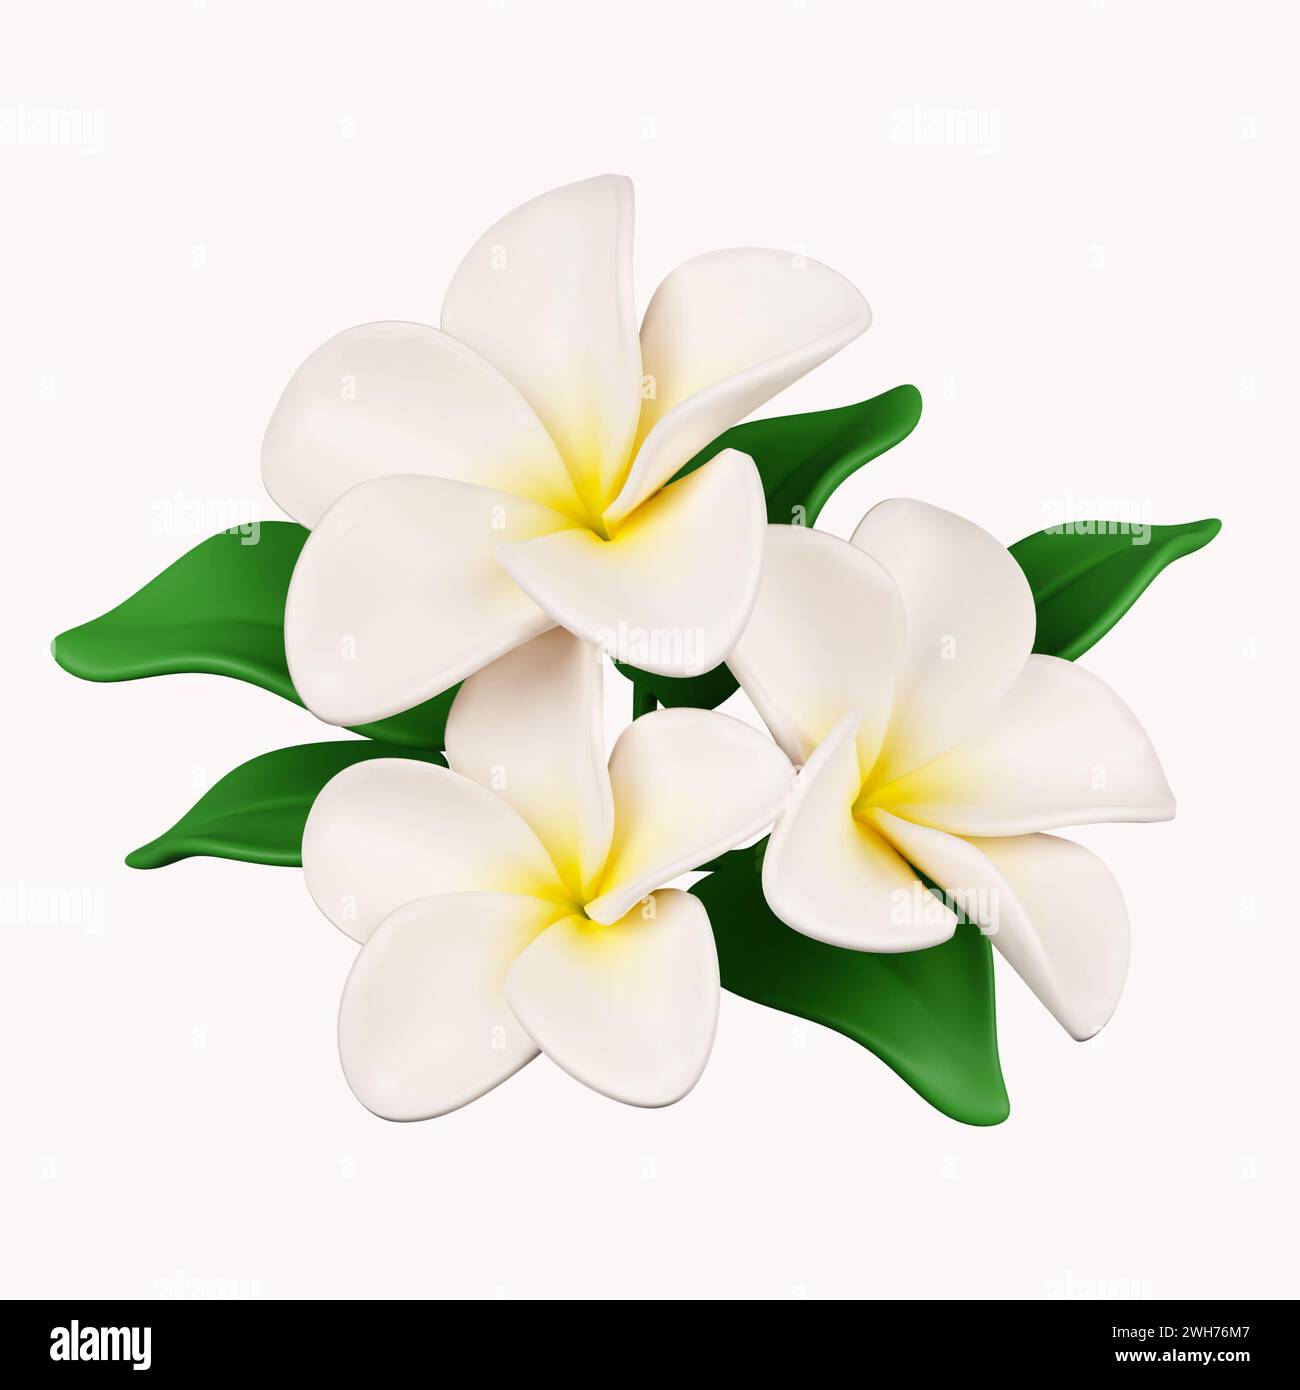 3d frangipani flowers .icon isolated on white background. 3d rendering illustration. Clipping path. Stock Photo